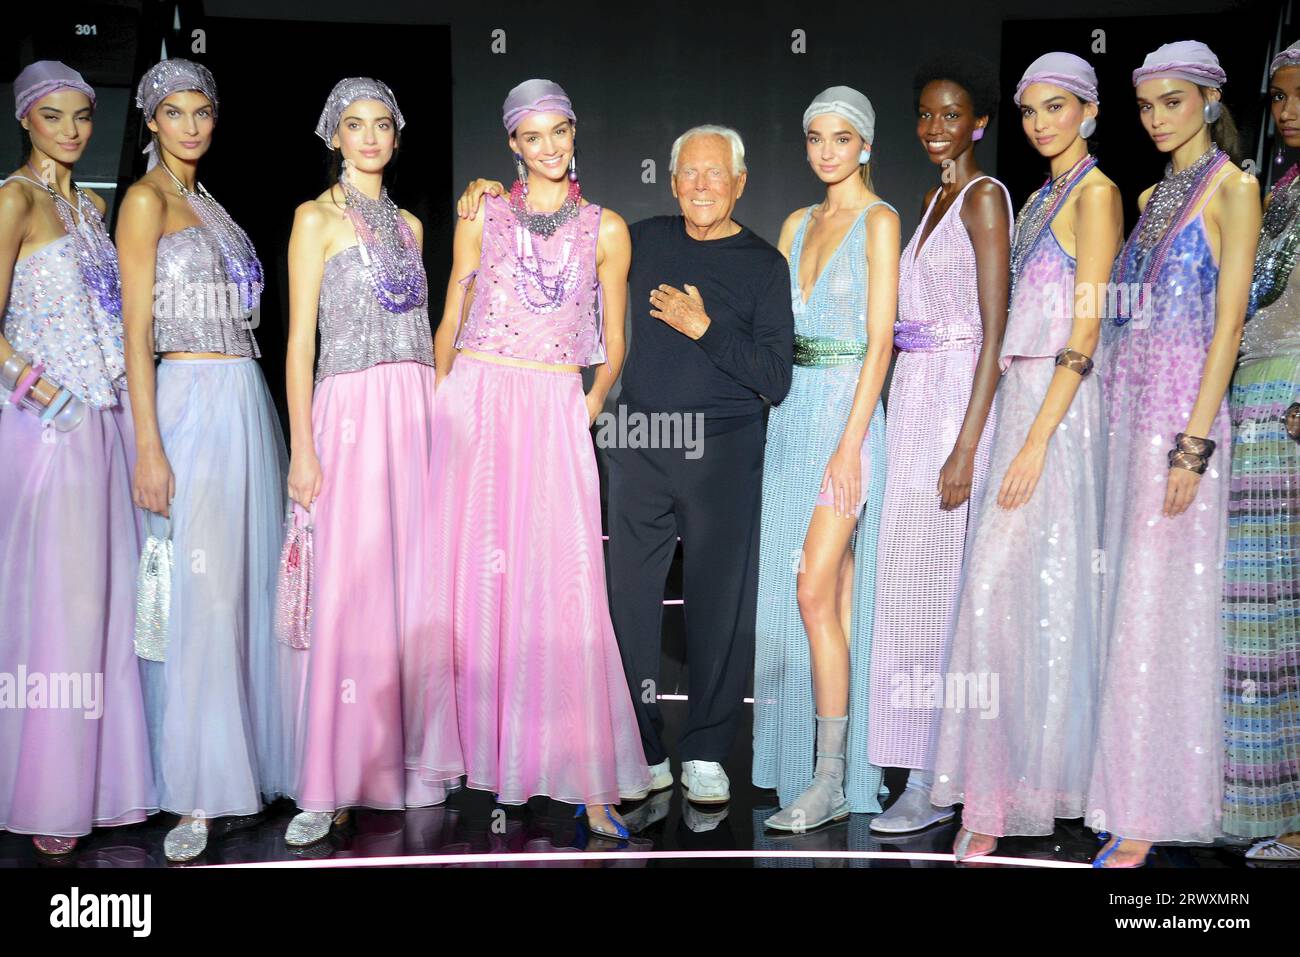 Fashion designer Giorgio Armani acknowledges the applause of the News  Photo - Getty Images